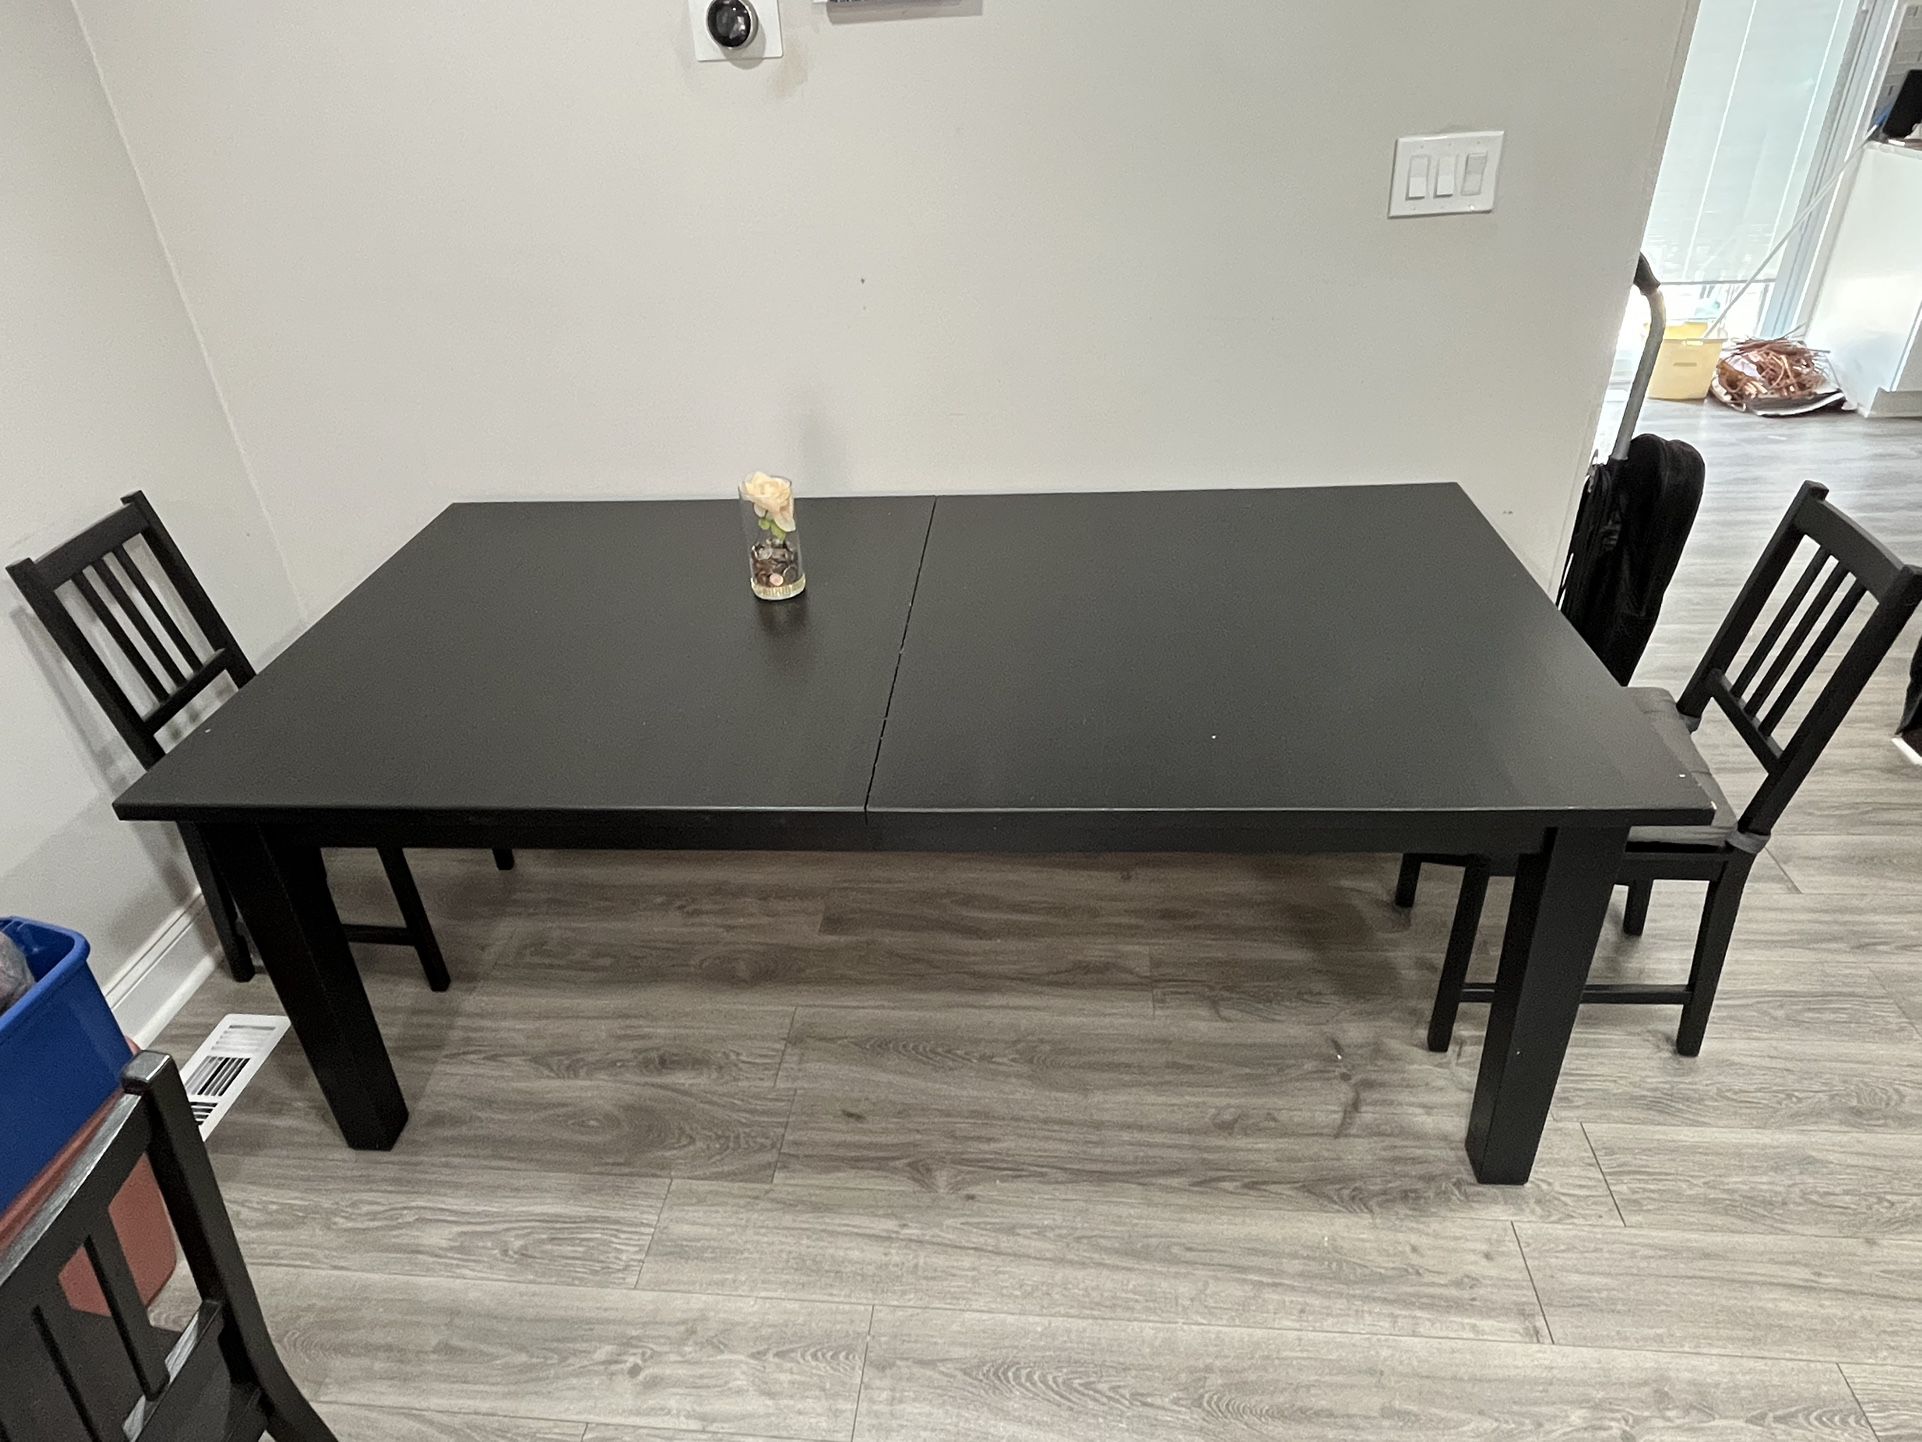 All back dining table (extendable)